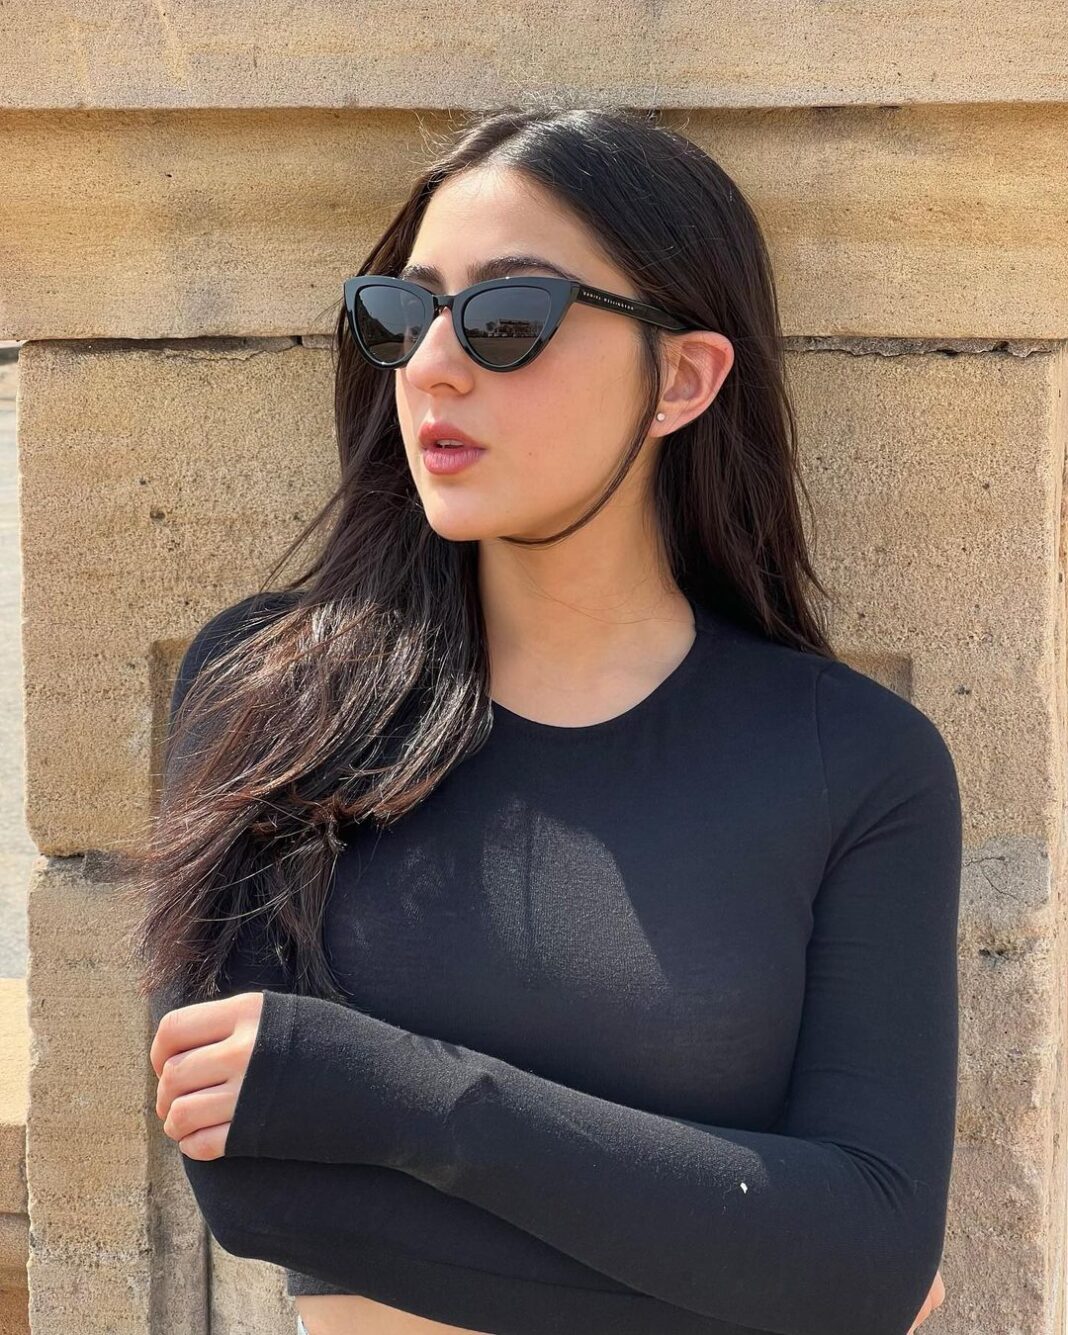 Sara Ali Khan Instagram - Summer Ready! ☀️🕶 Wearing the new LYNX from @danielwellington Eyewear collection. Bringing an edgy feminity to any look, these will surely make a lasting impression. Style your outfits this season with the new #dweyewear, shop from www.danielwellington.com and use my code SARAALI to get 15% off #danielwellington #partnership 📸 & 💇‍♀️: @the.mad.hair.scientist